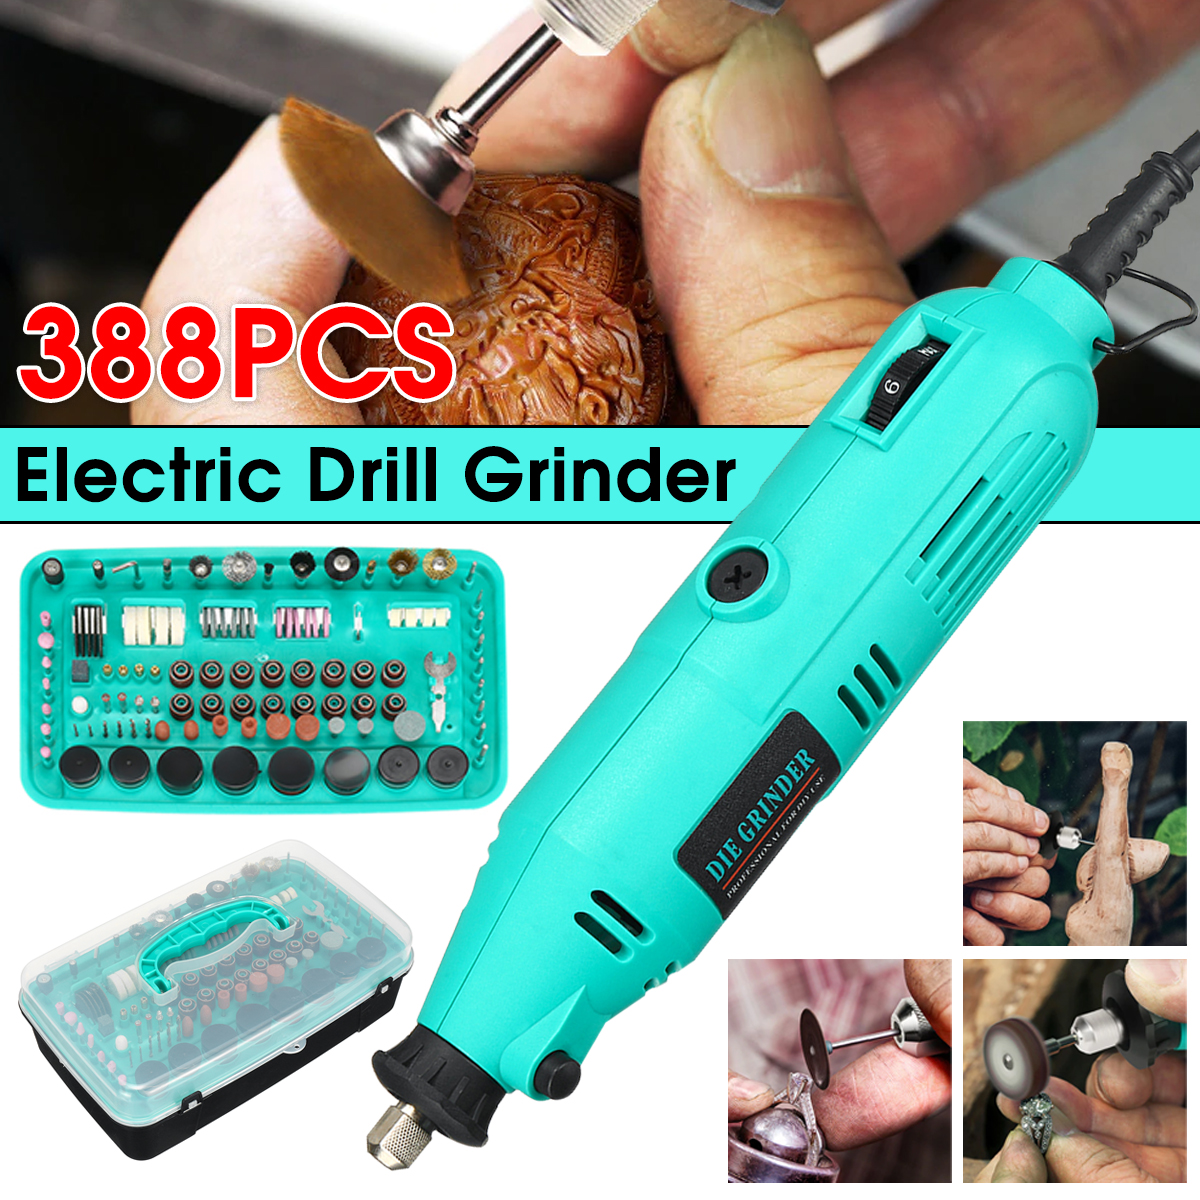 130W-Electric-Grinder-Drill-Engraver-Rotary-Tool-Variable-Speed-Rotary-Carving-Polishing-Machine-110-1905899-1